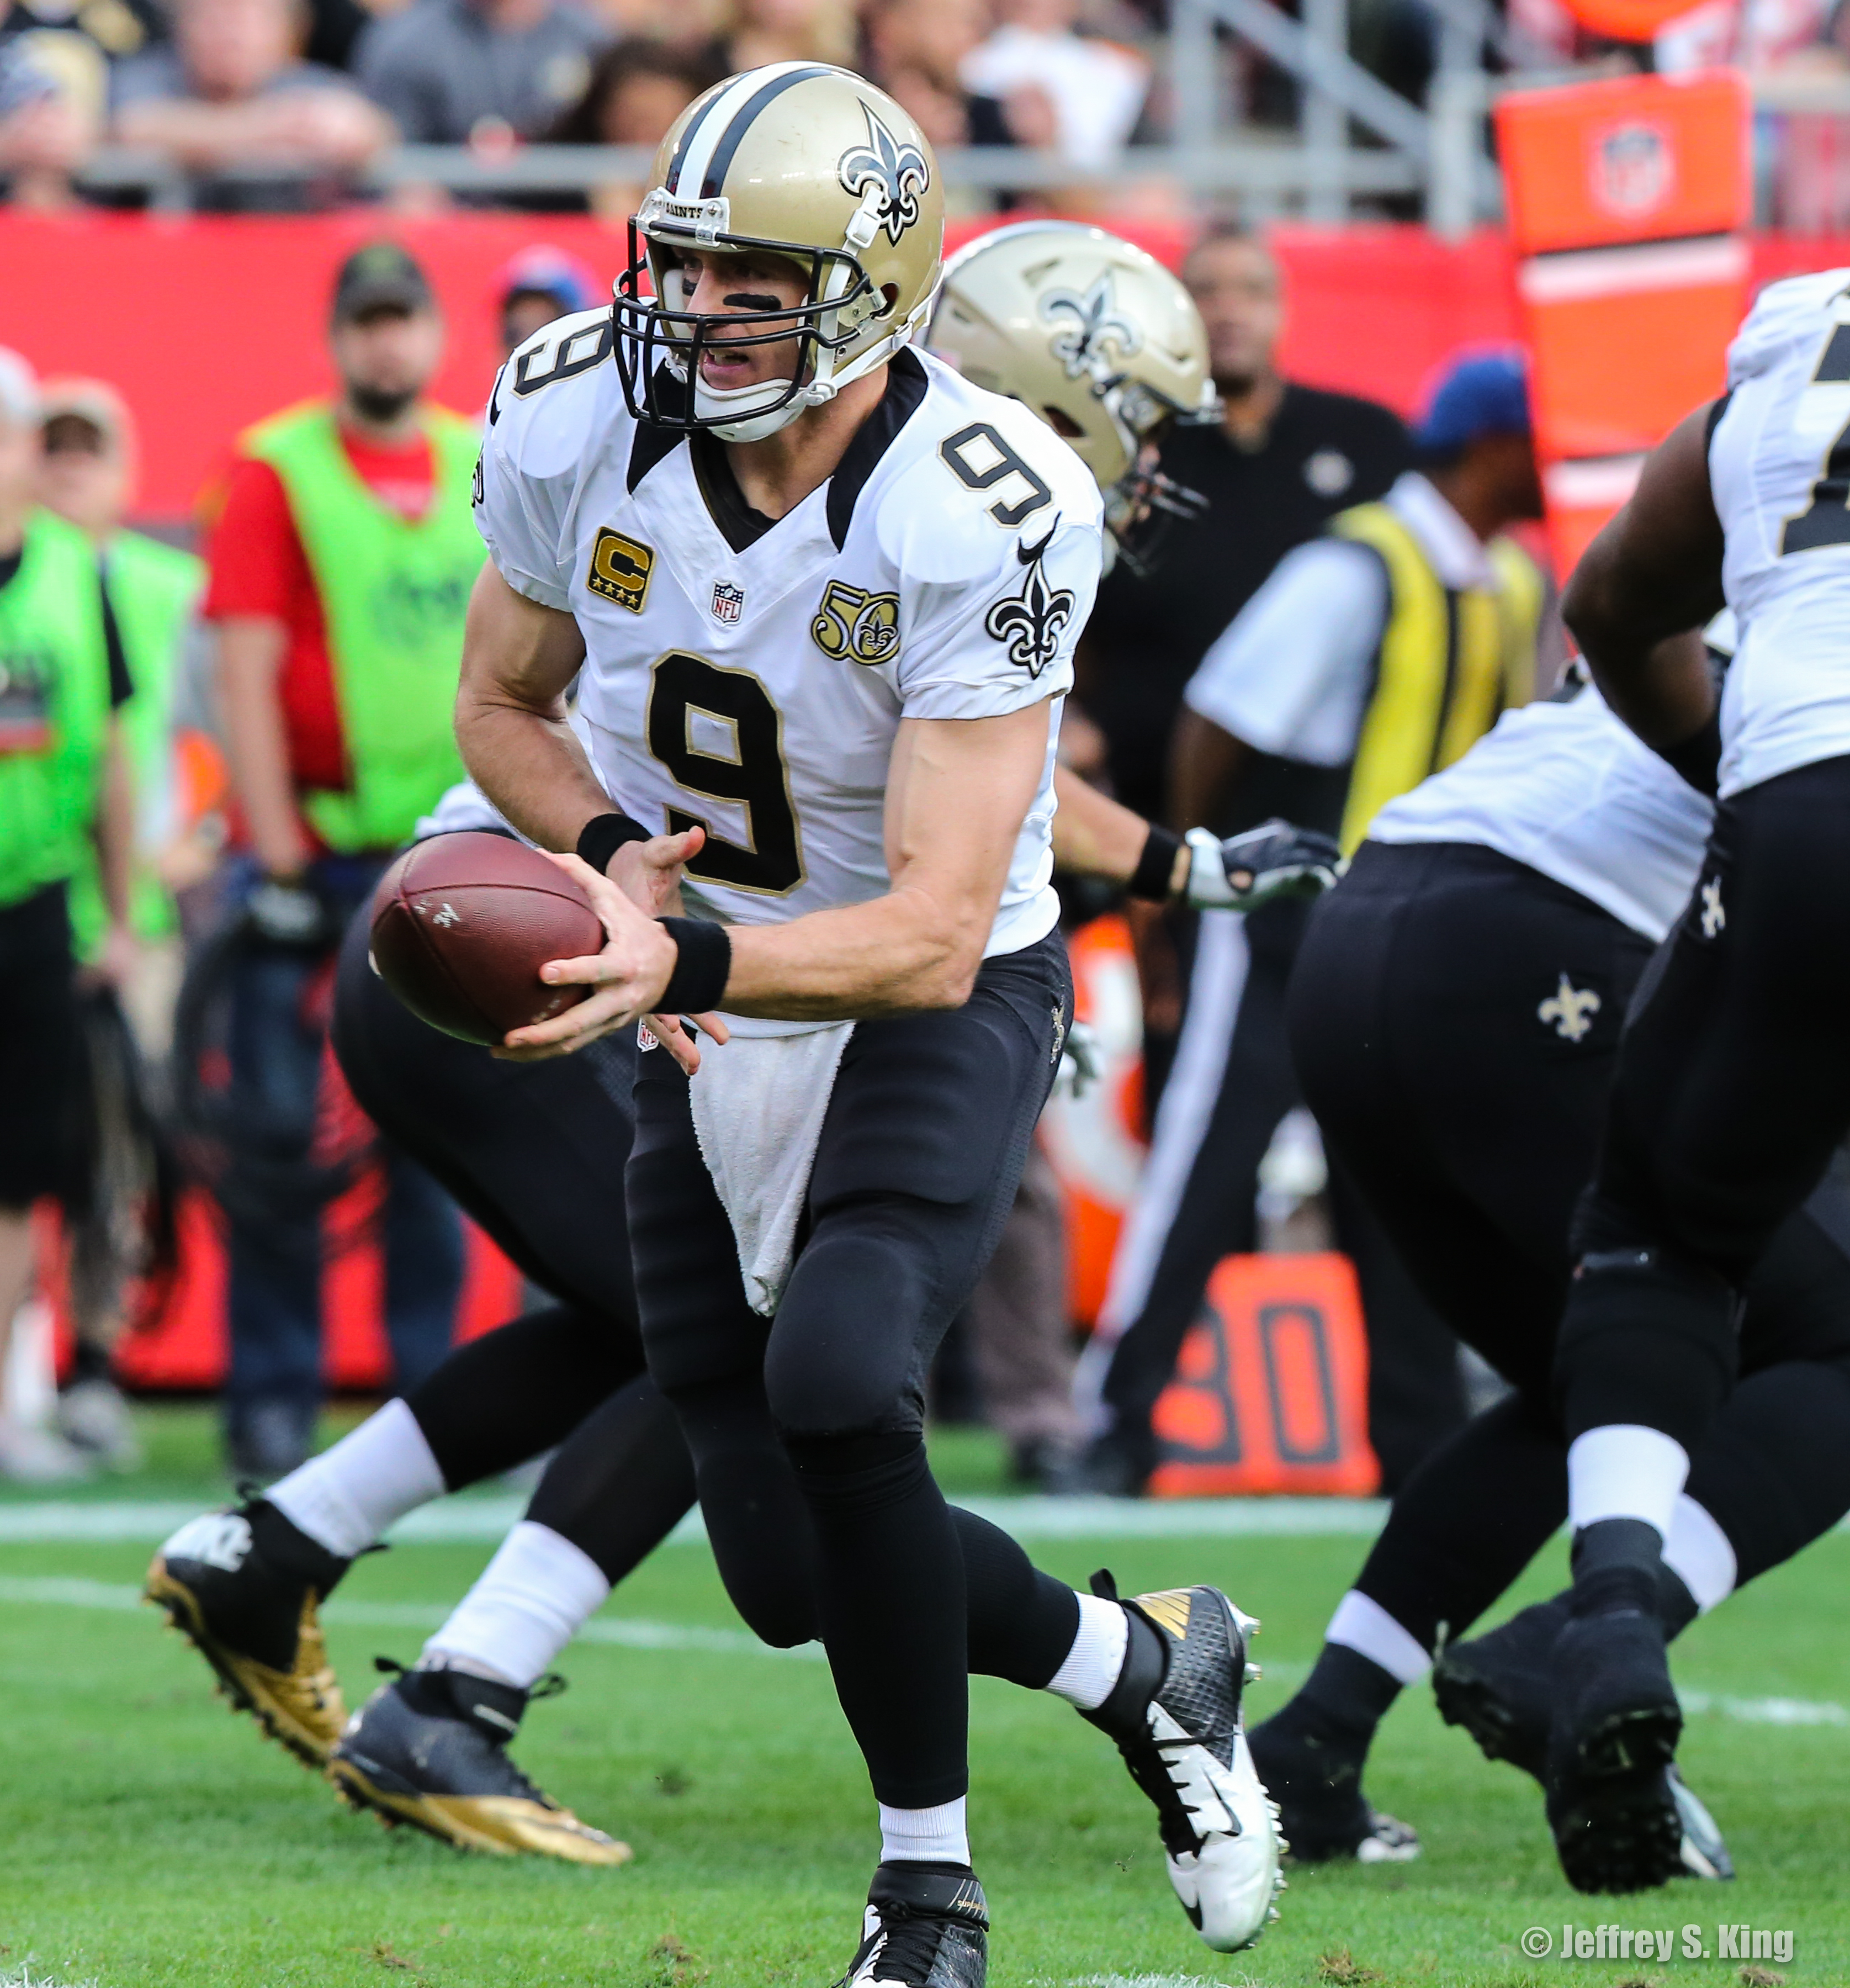 Brees has won 16 times over the Bucs, but only three of the last six./JEFFREY S. KING